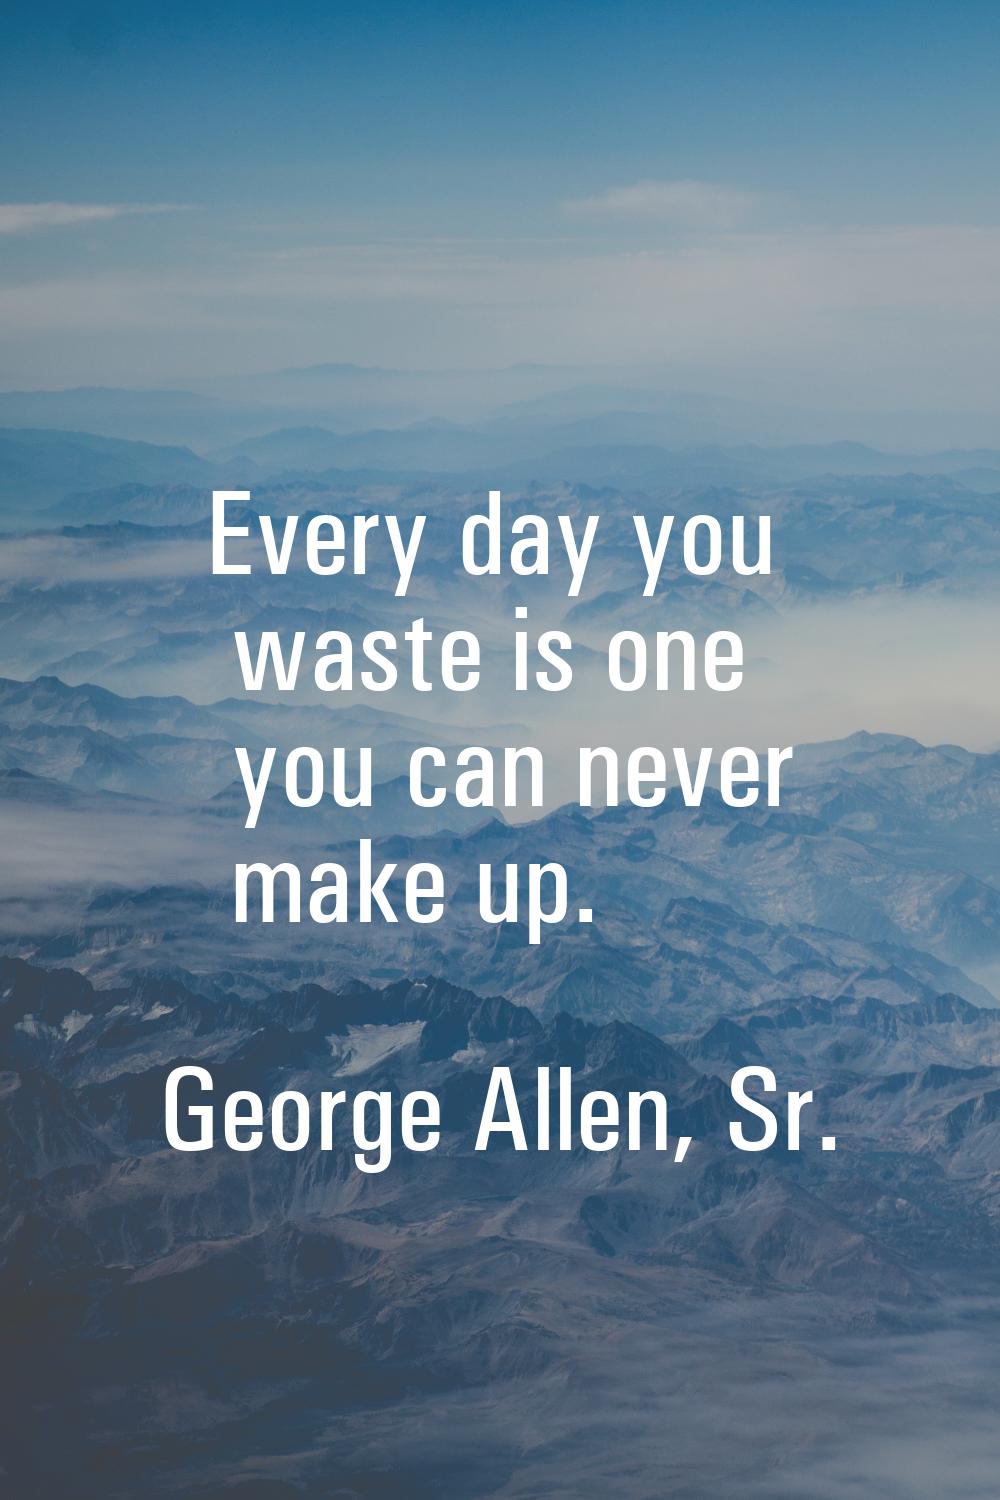 Every day you waste is one you can never make up.